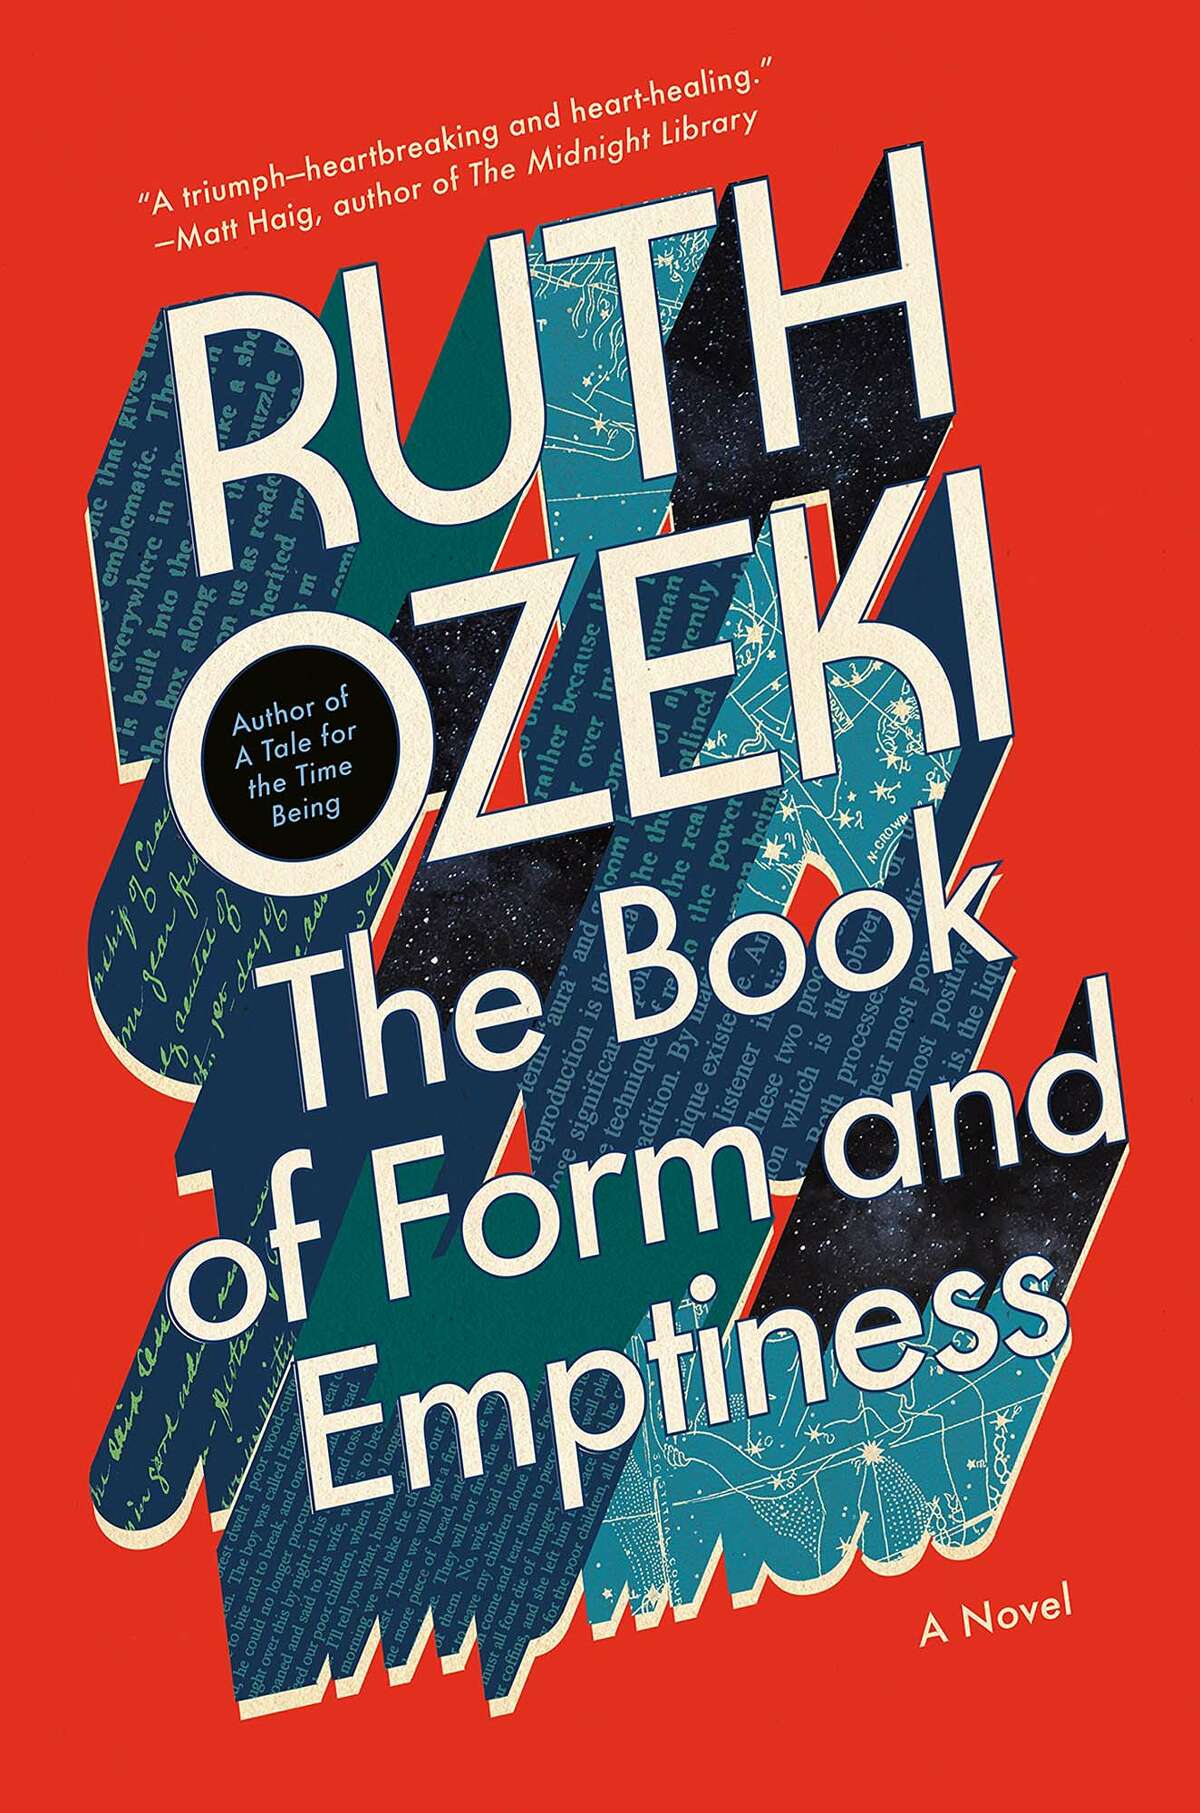 "The Book of Form and Emptiness"